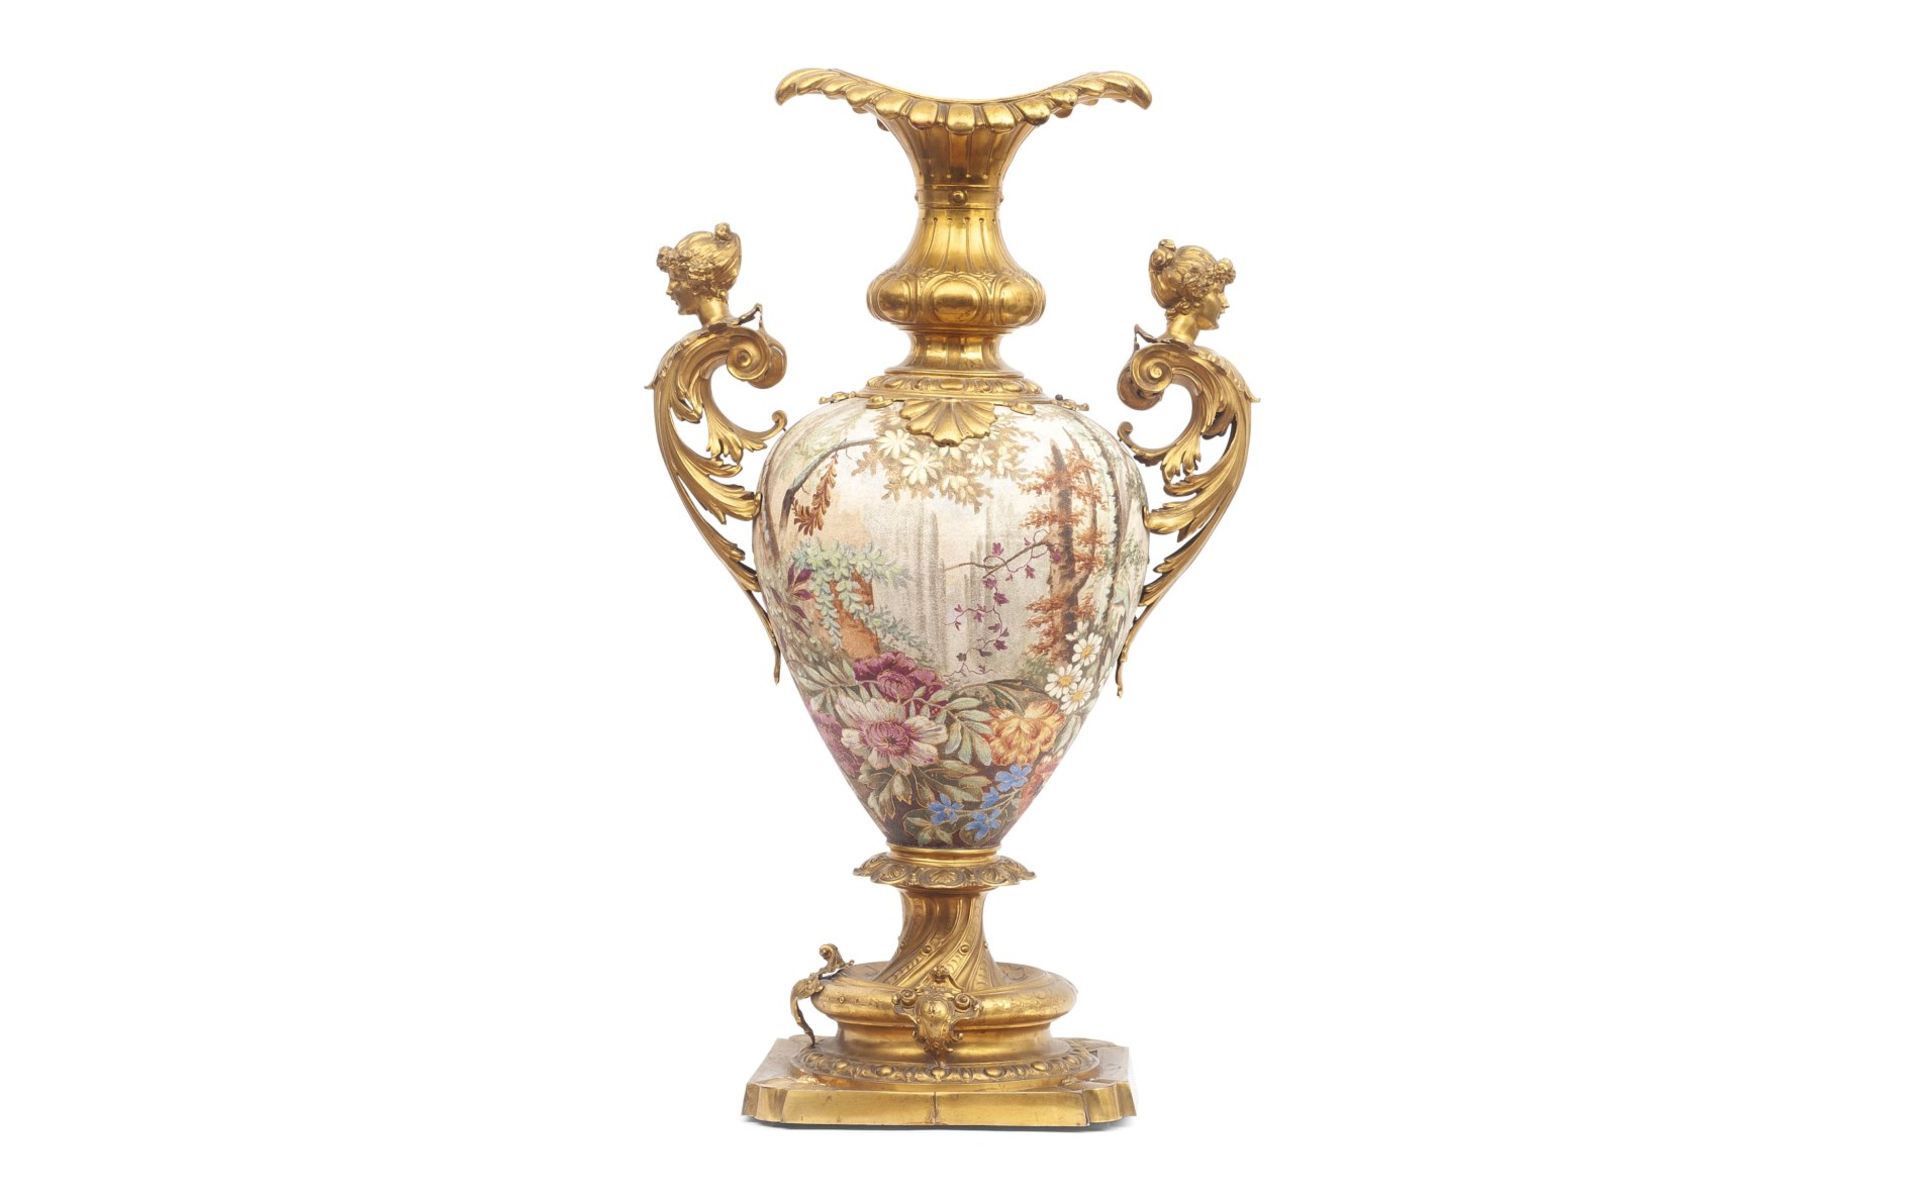 A LARGE LATE 19TH CENTURY CERAMIC VASE WITH GILT METAL MOUNTS